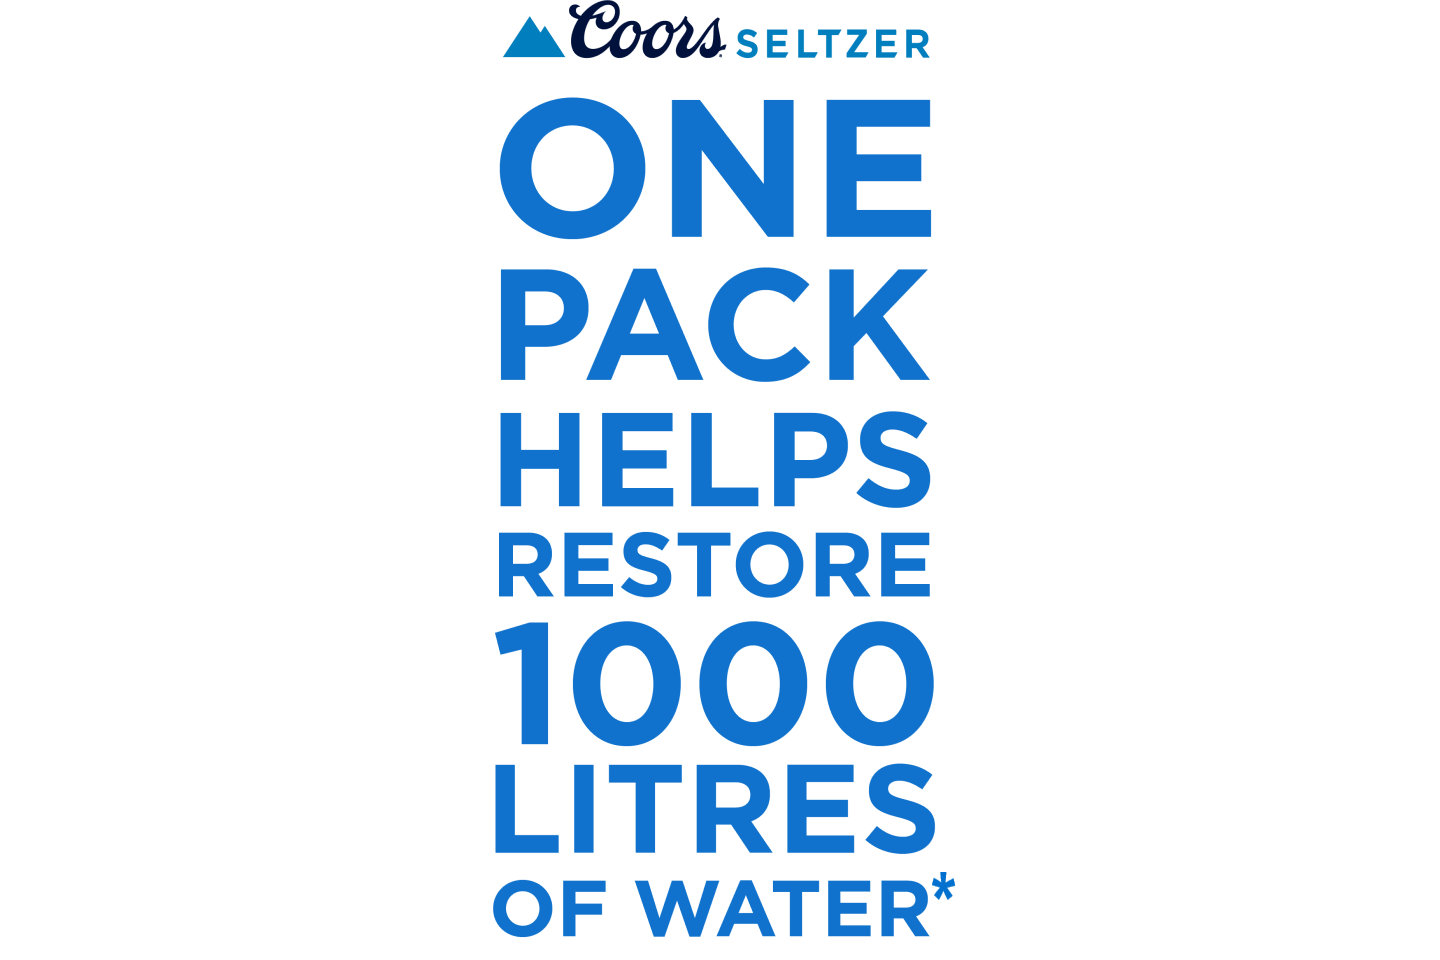 One pack helps restore 1000 litres of water